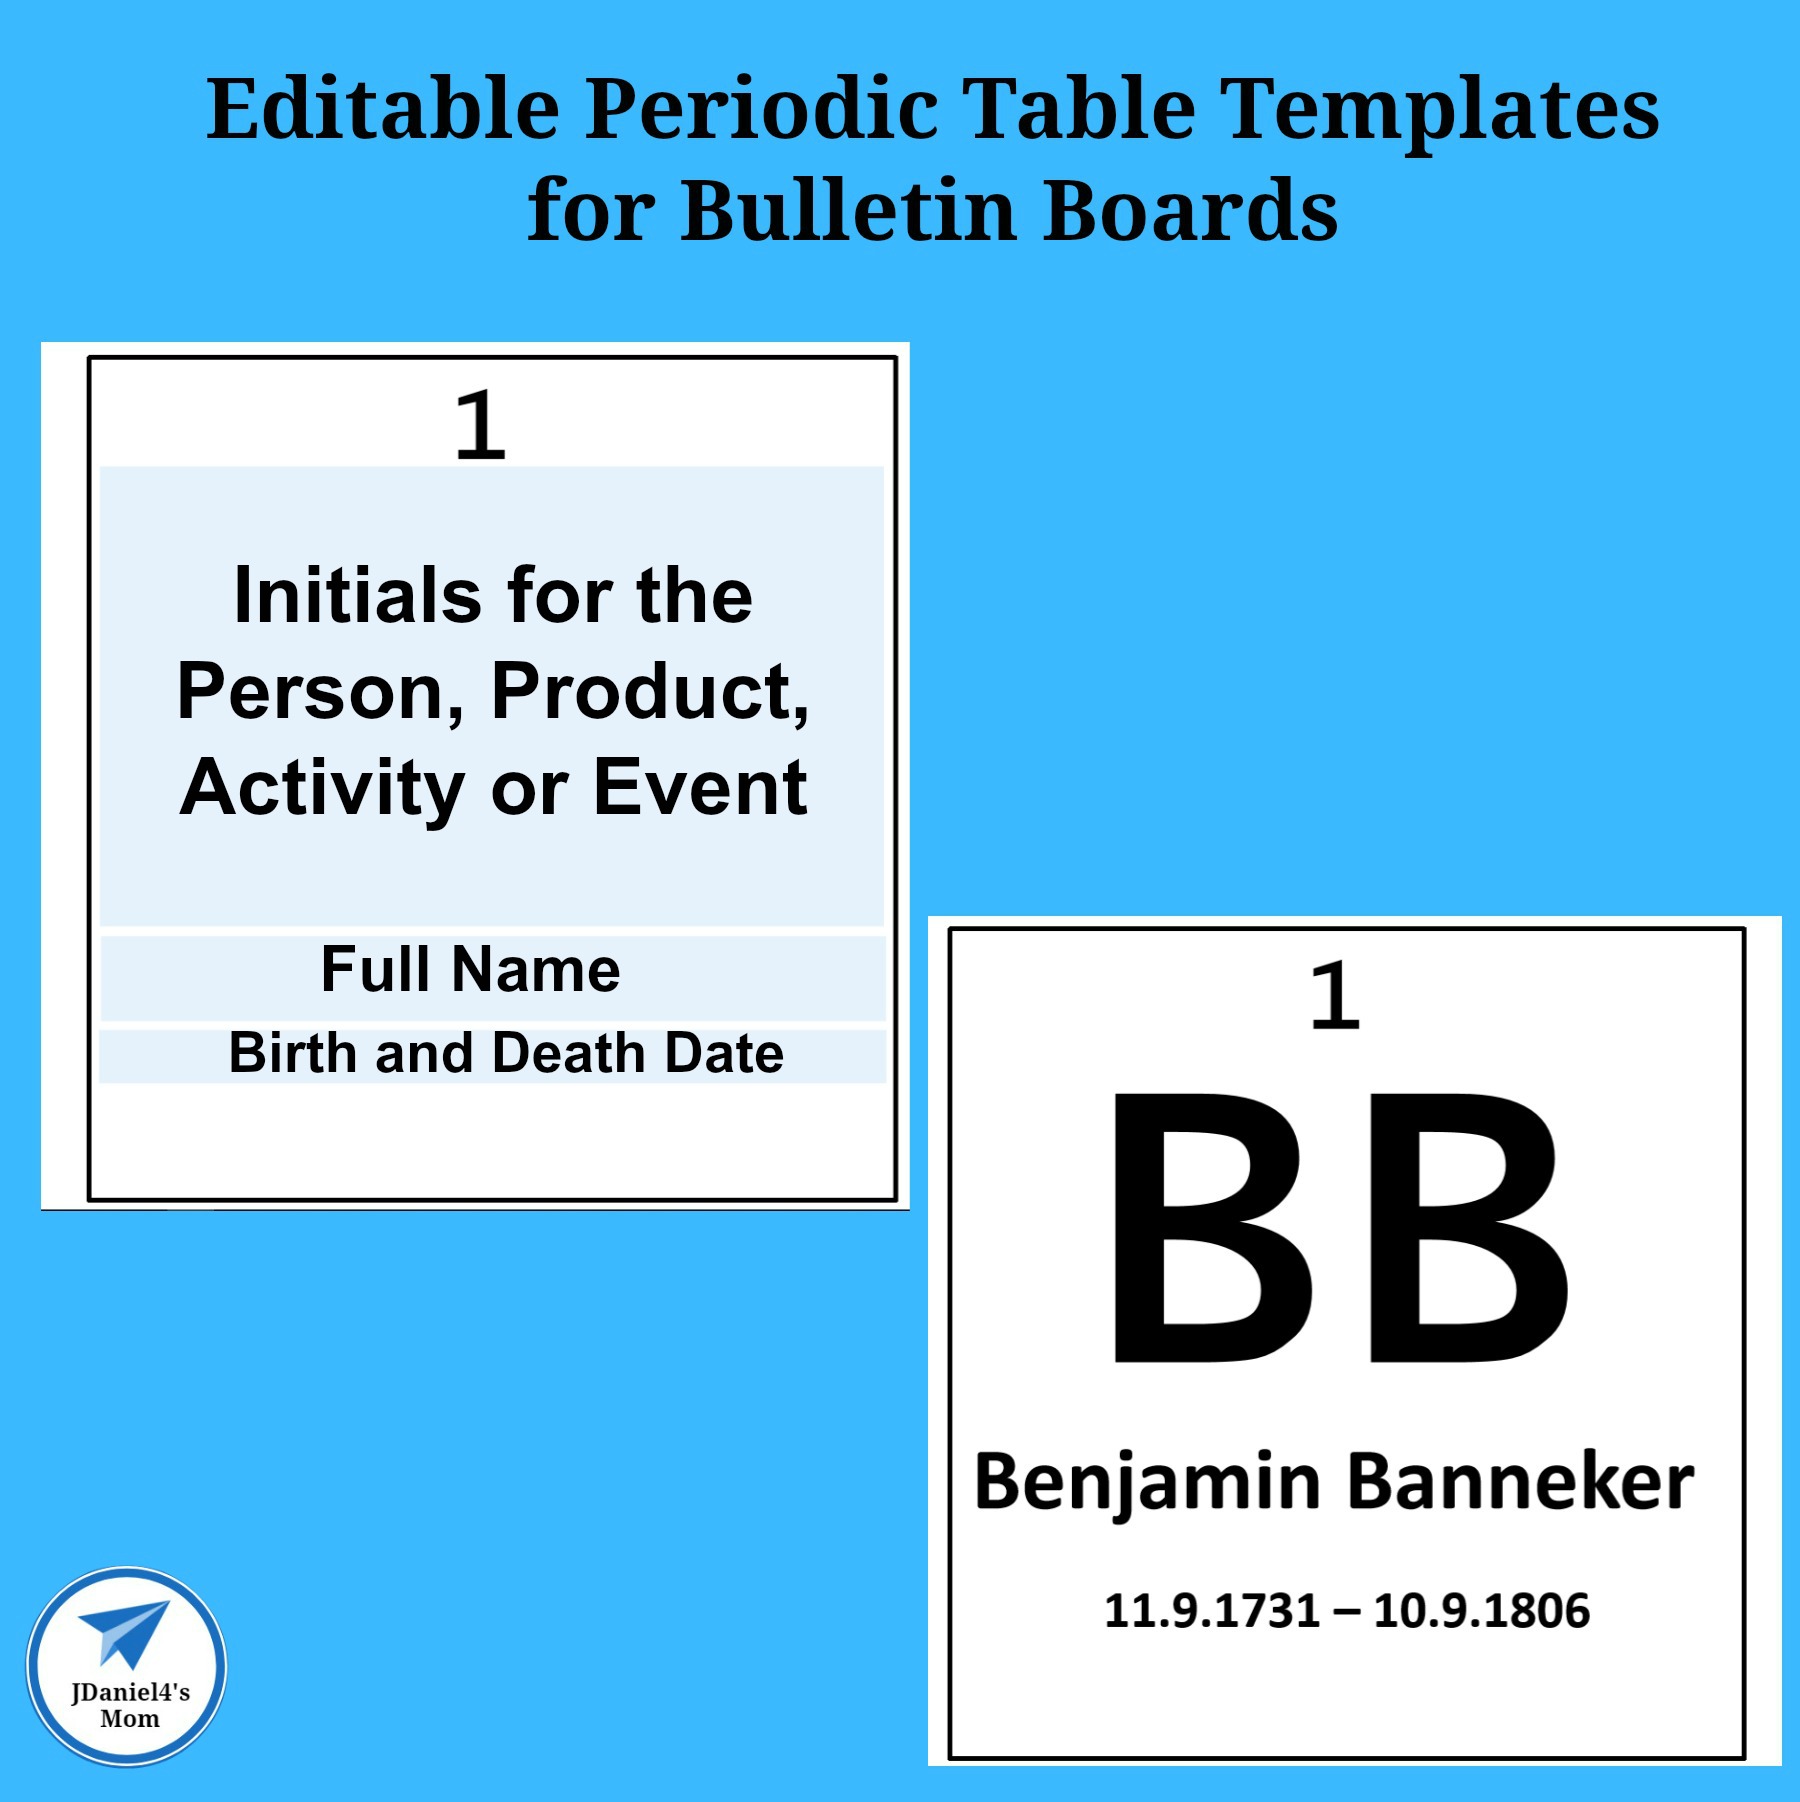 Editable Periodic Table Templates for Bulletin Boards